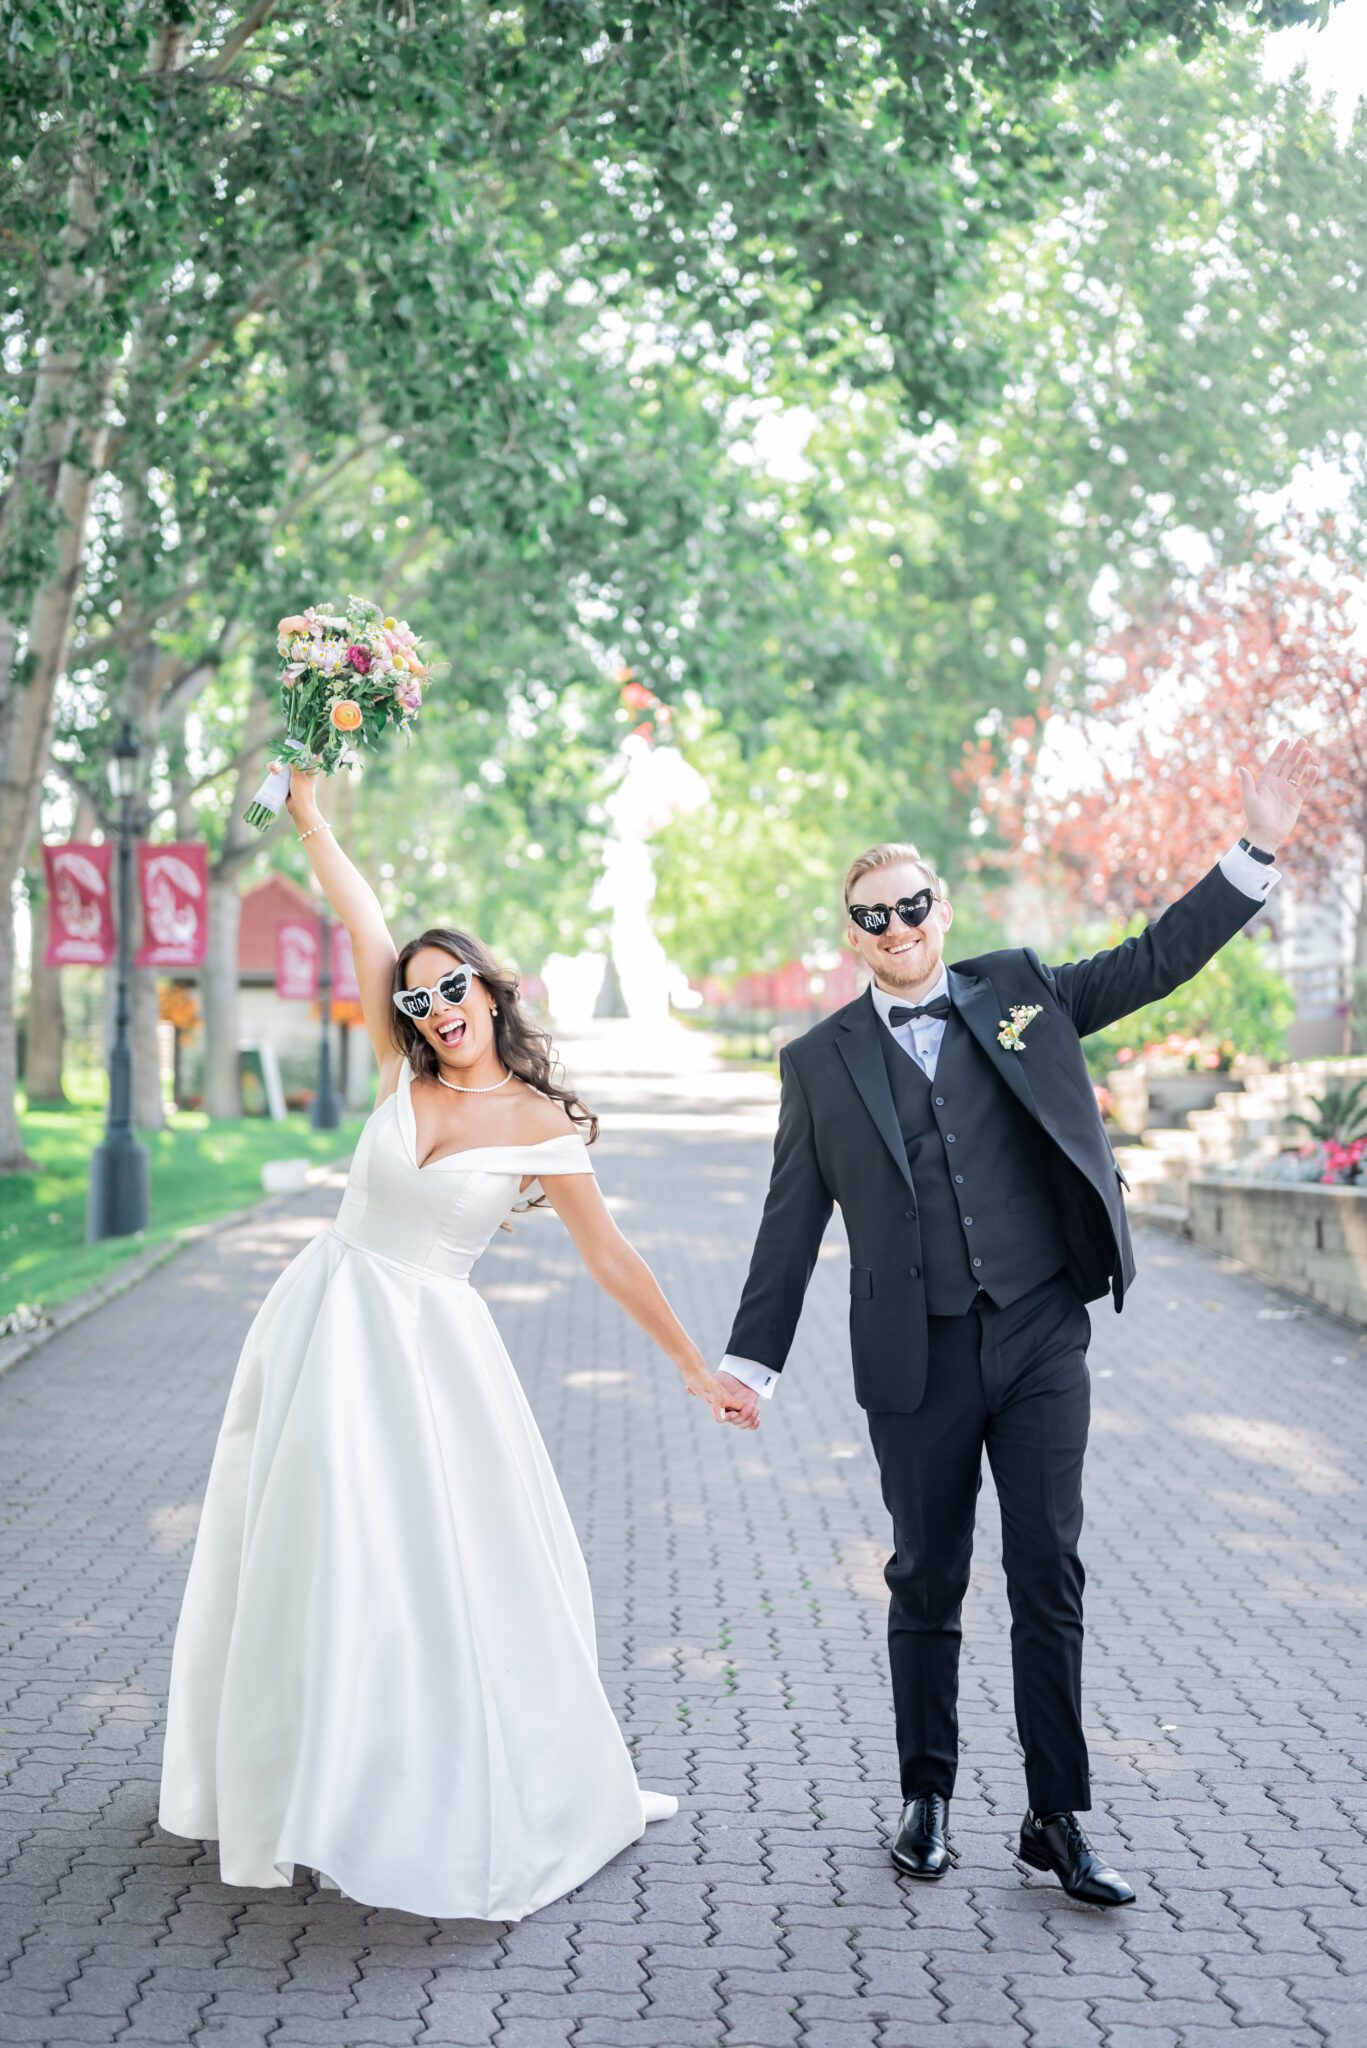 Couple raises their arms in celebration at their whimsical garden wedding at Spruce Meadows, featuring custom heart shaped sunglasses and a colourful bridal bouquet. 